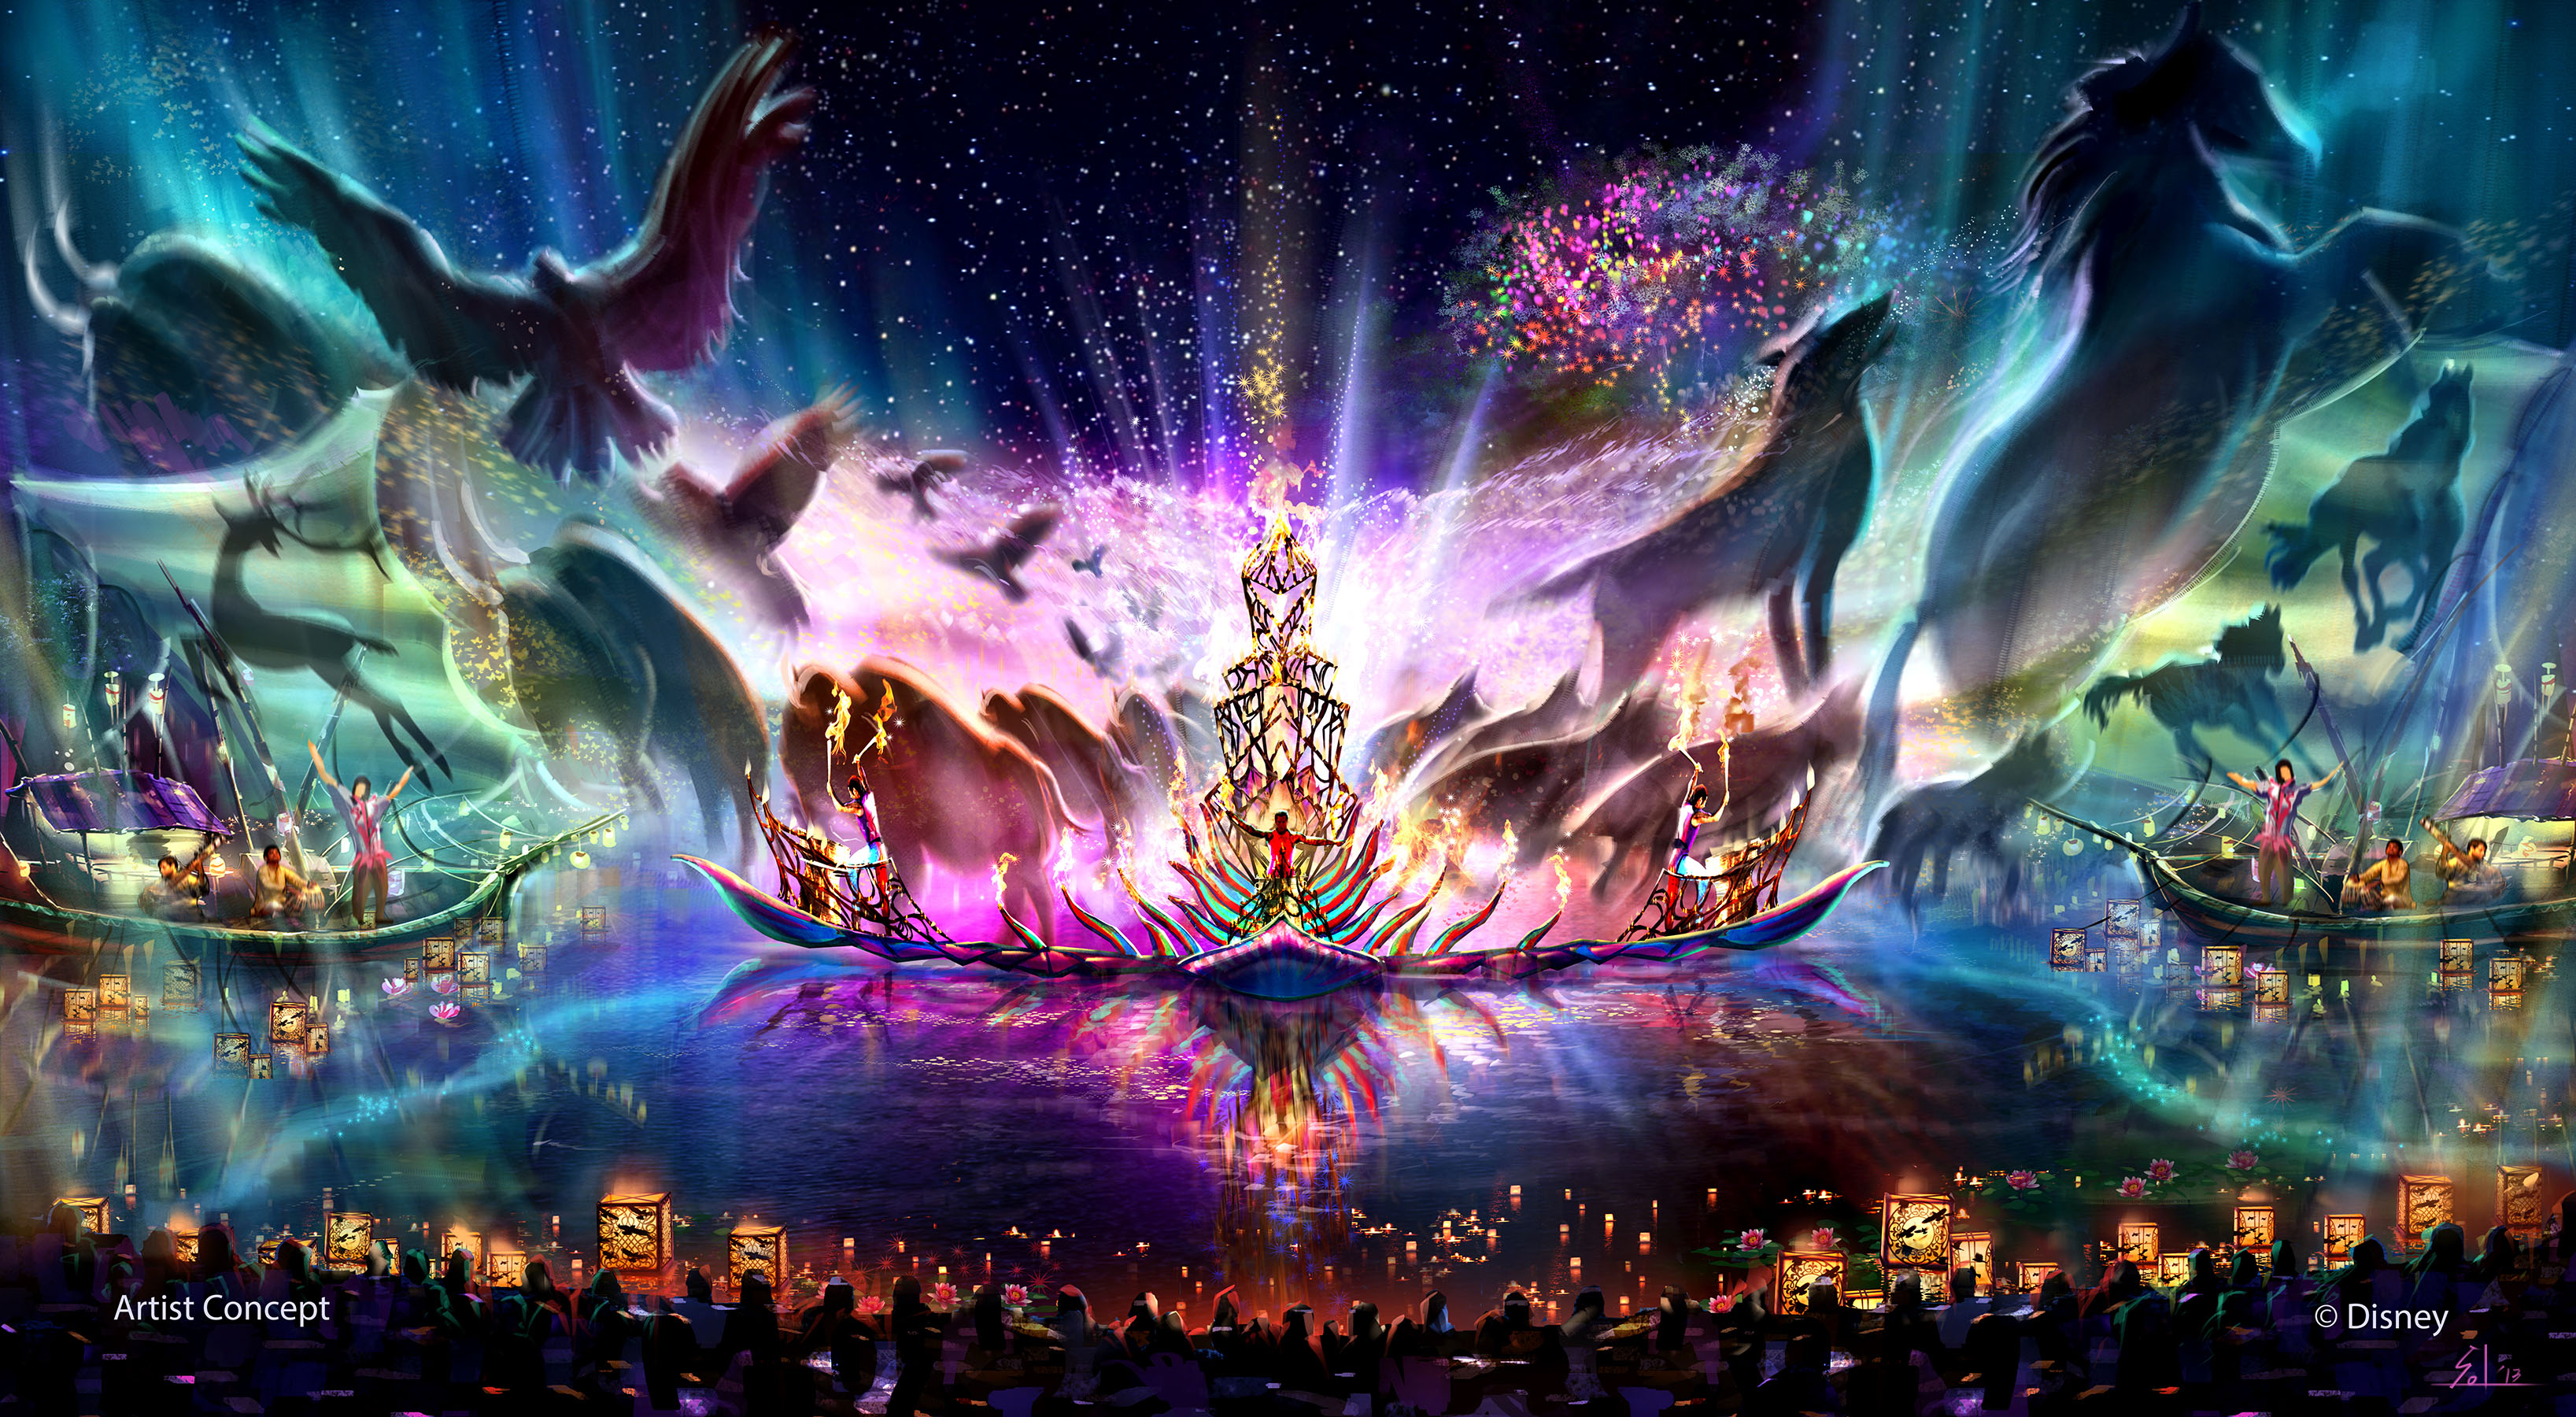 All-new entertainment experiences, including a new nighttime spectacular, are among the exciting projects coming in the years ahead as DisneyÕs Animal Kingdom begins the largest expansion in park history. ÒRivers of LightÓ promises to be an innovative show unlike anything ever seen in Disney Parks, combining live music, floating lanterns, water screens and swirling animal imagery. The show will magically come to life on the broad, natural stage of the Discovery River, between Discovery Island and Expedition Everest. (Disney)